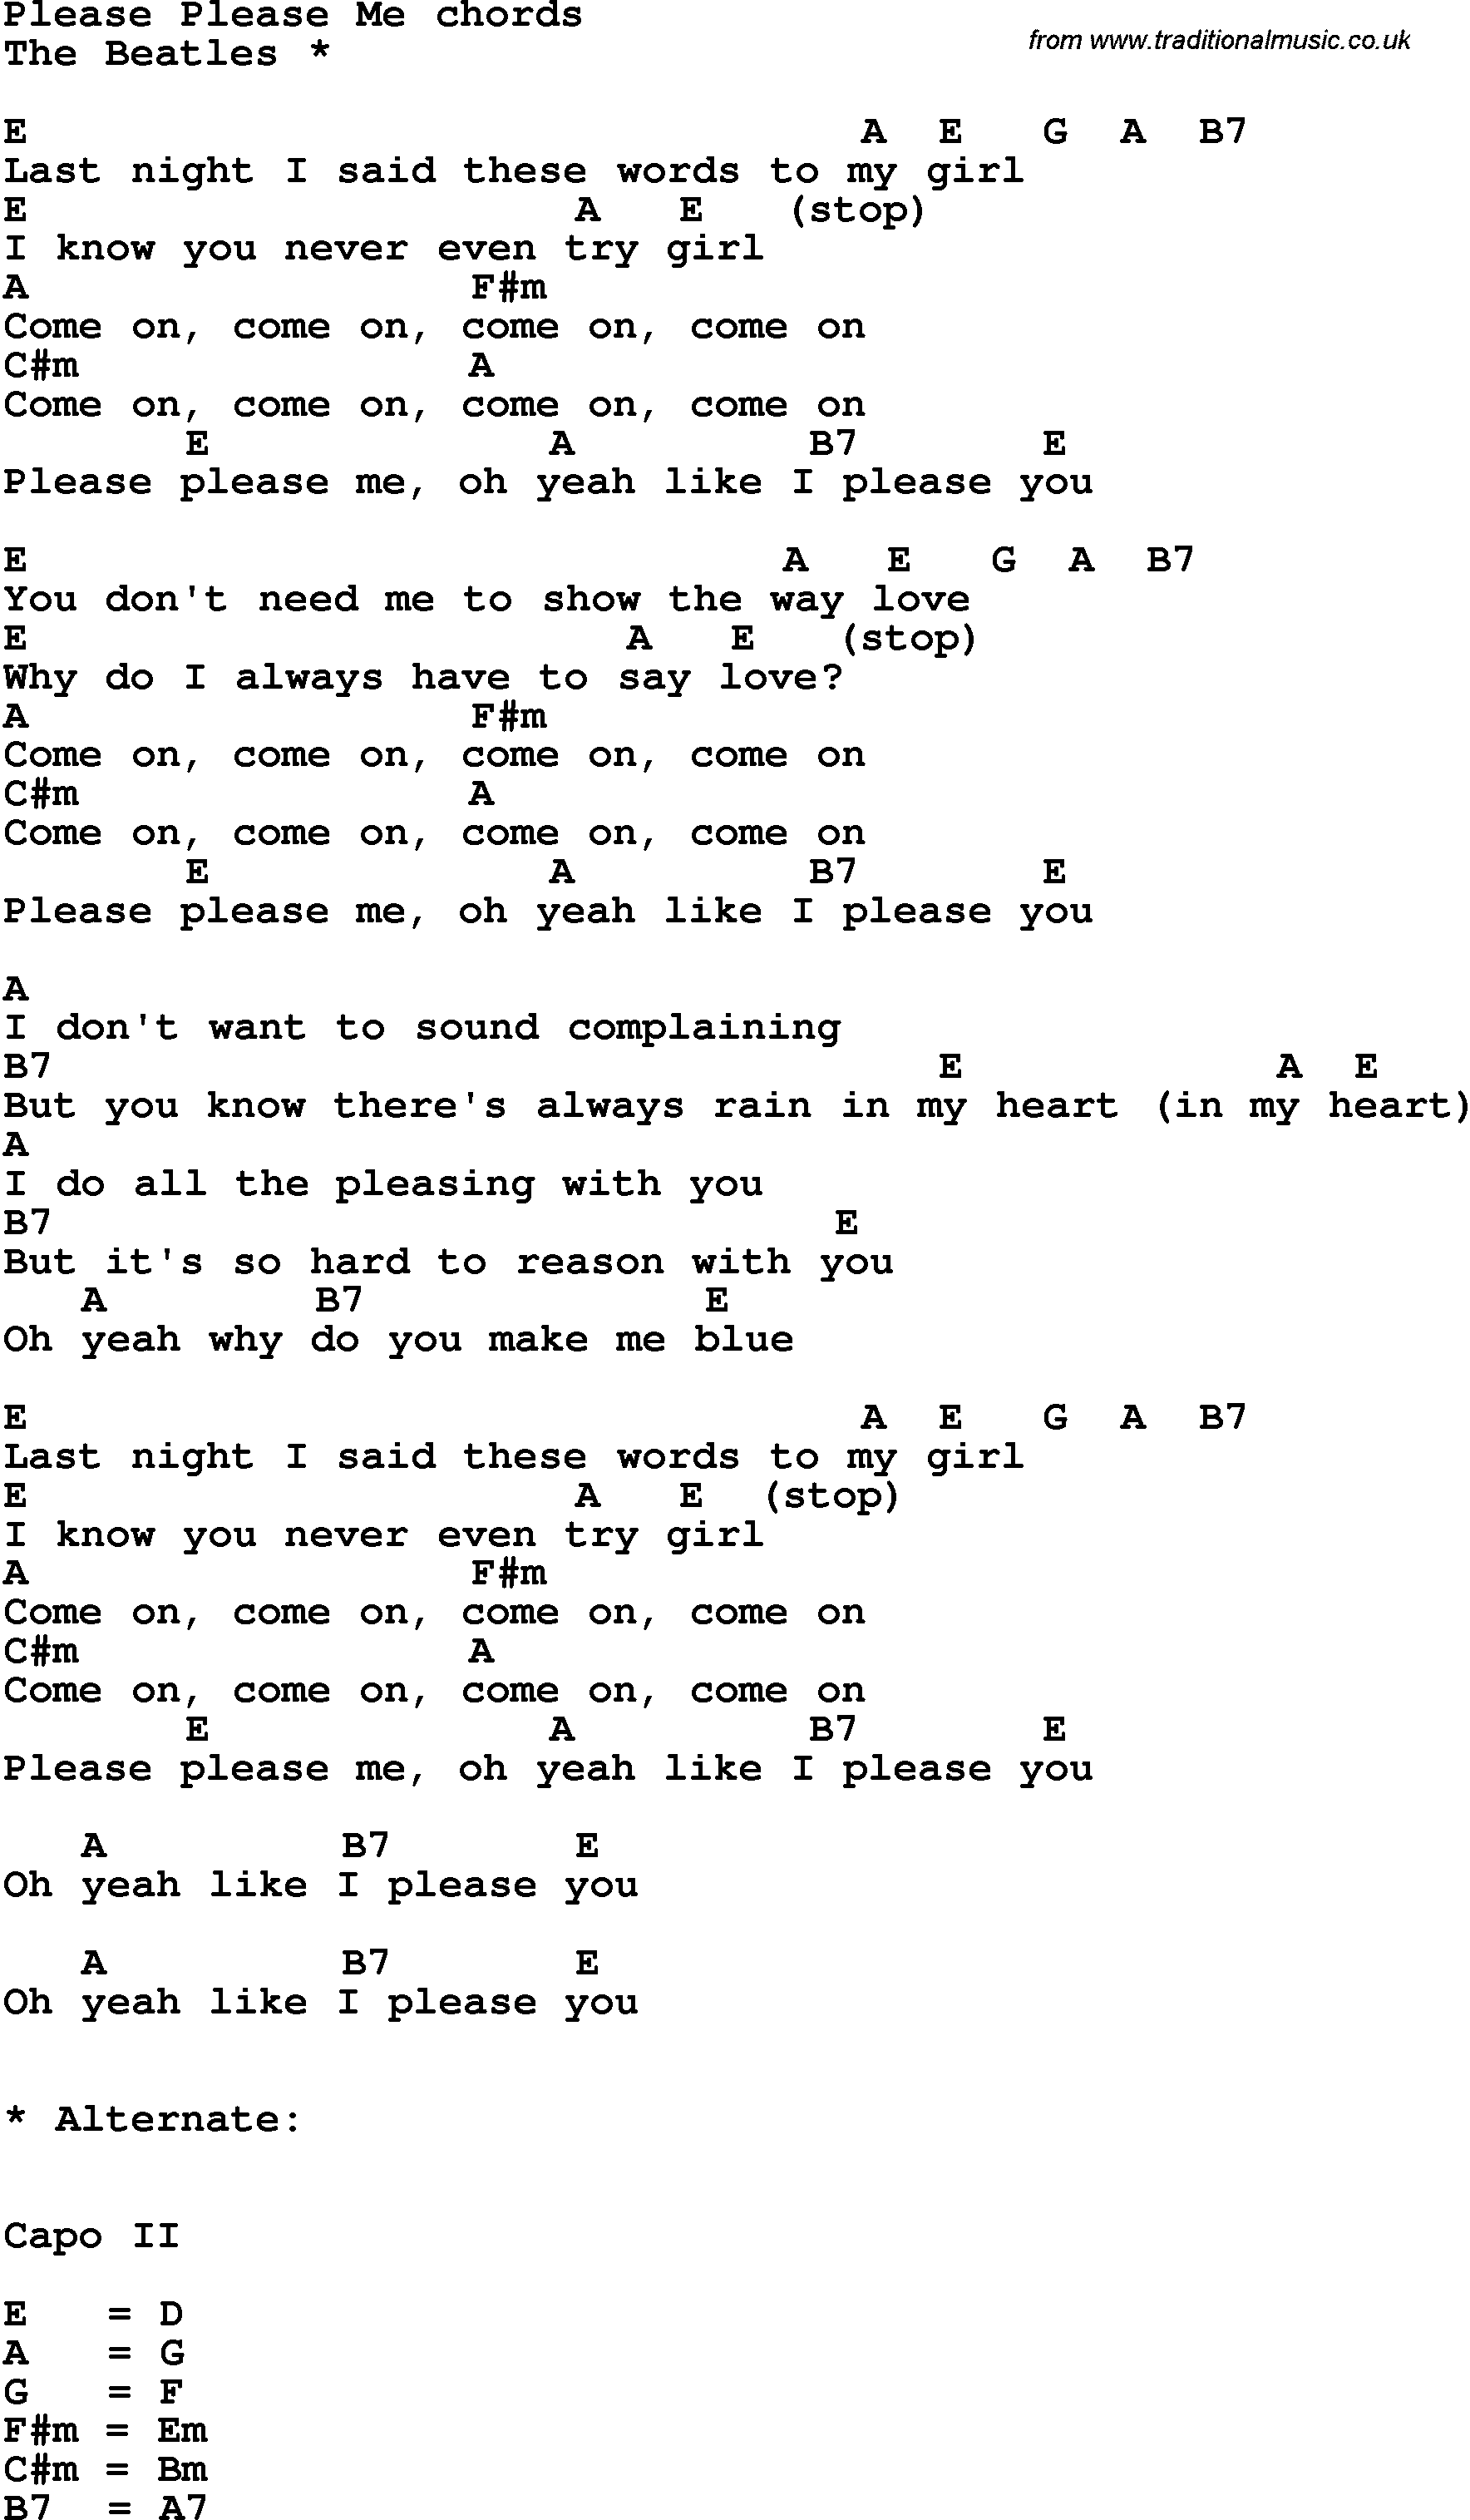 Song Lyrics with guitar chords for Please Please Me - The Beatles